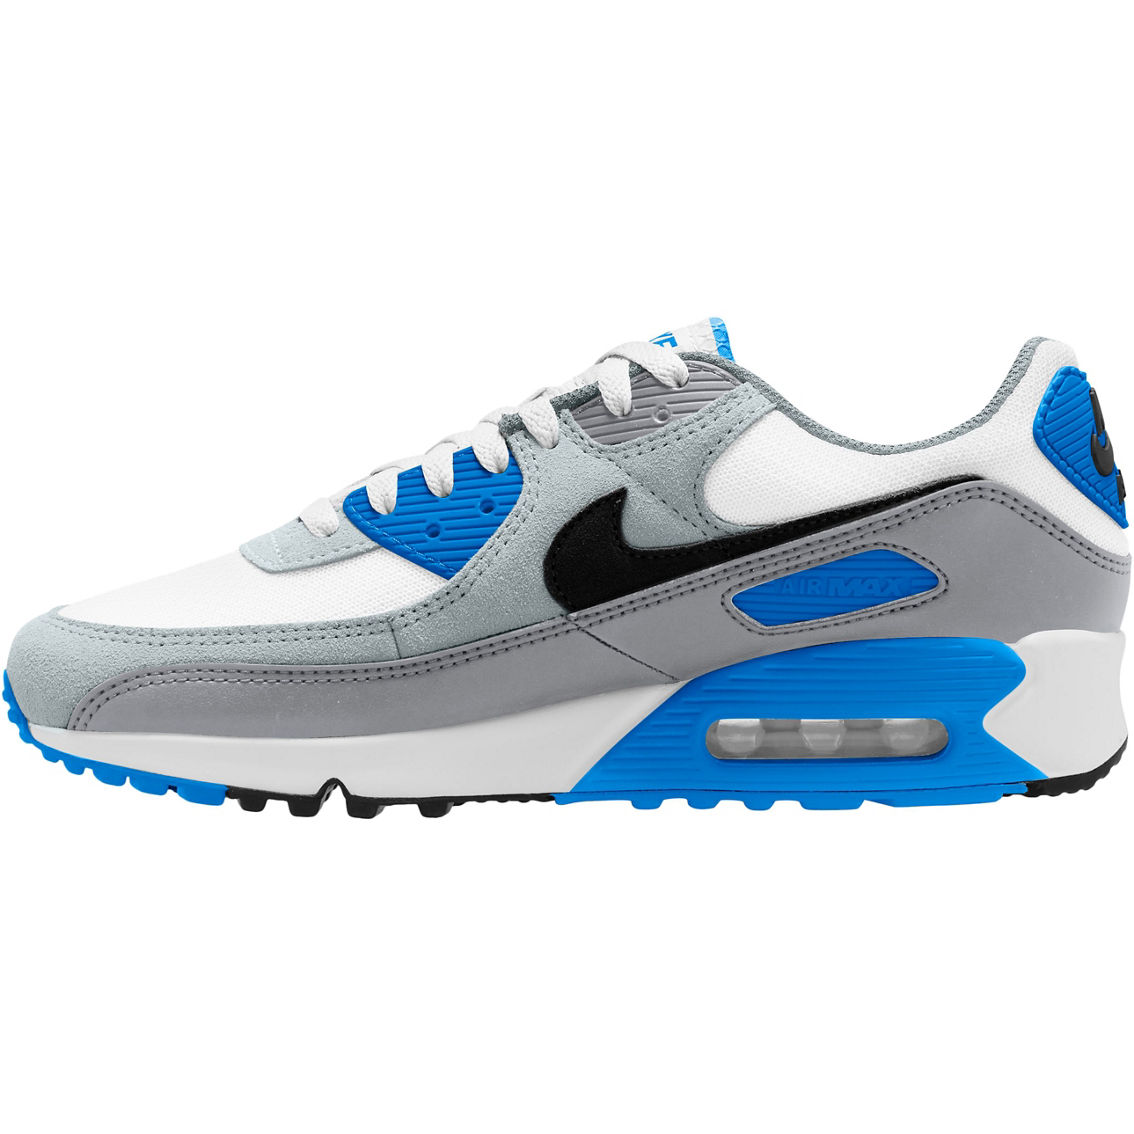 Nike Men's Air Max 90 Running Shoes - Image 2 of 4